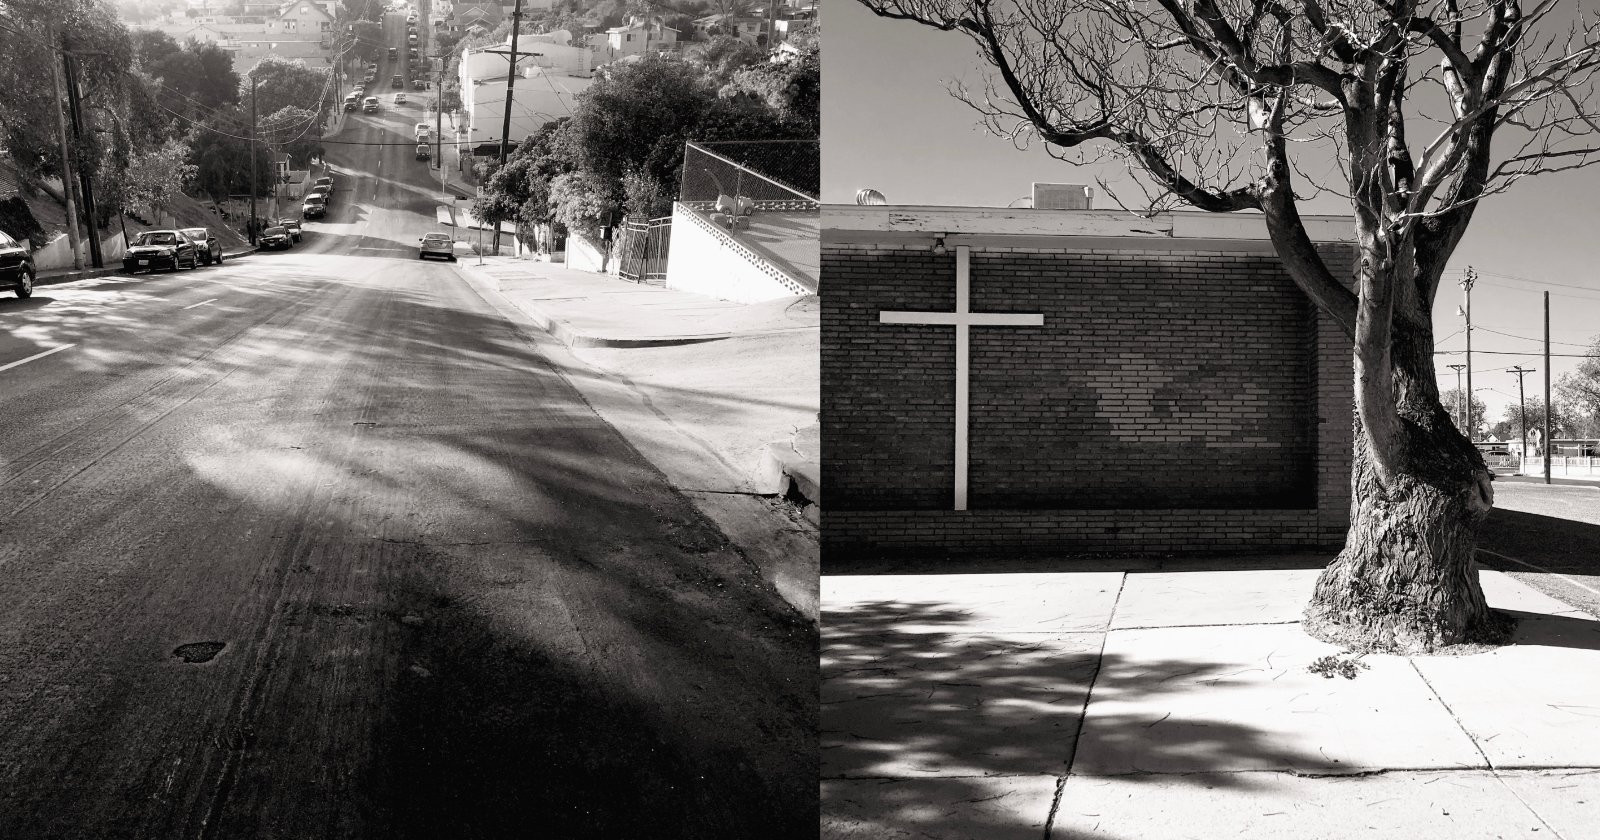 A black-and-white image split into two scenes: on the left, a steep, empty urban street lined with cars and trees extends into the distance; on the right, a brick wall of a building with a large white cross and a leafless tree casting shadows on the sidewalk.